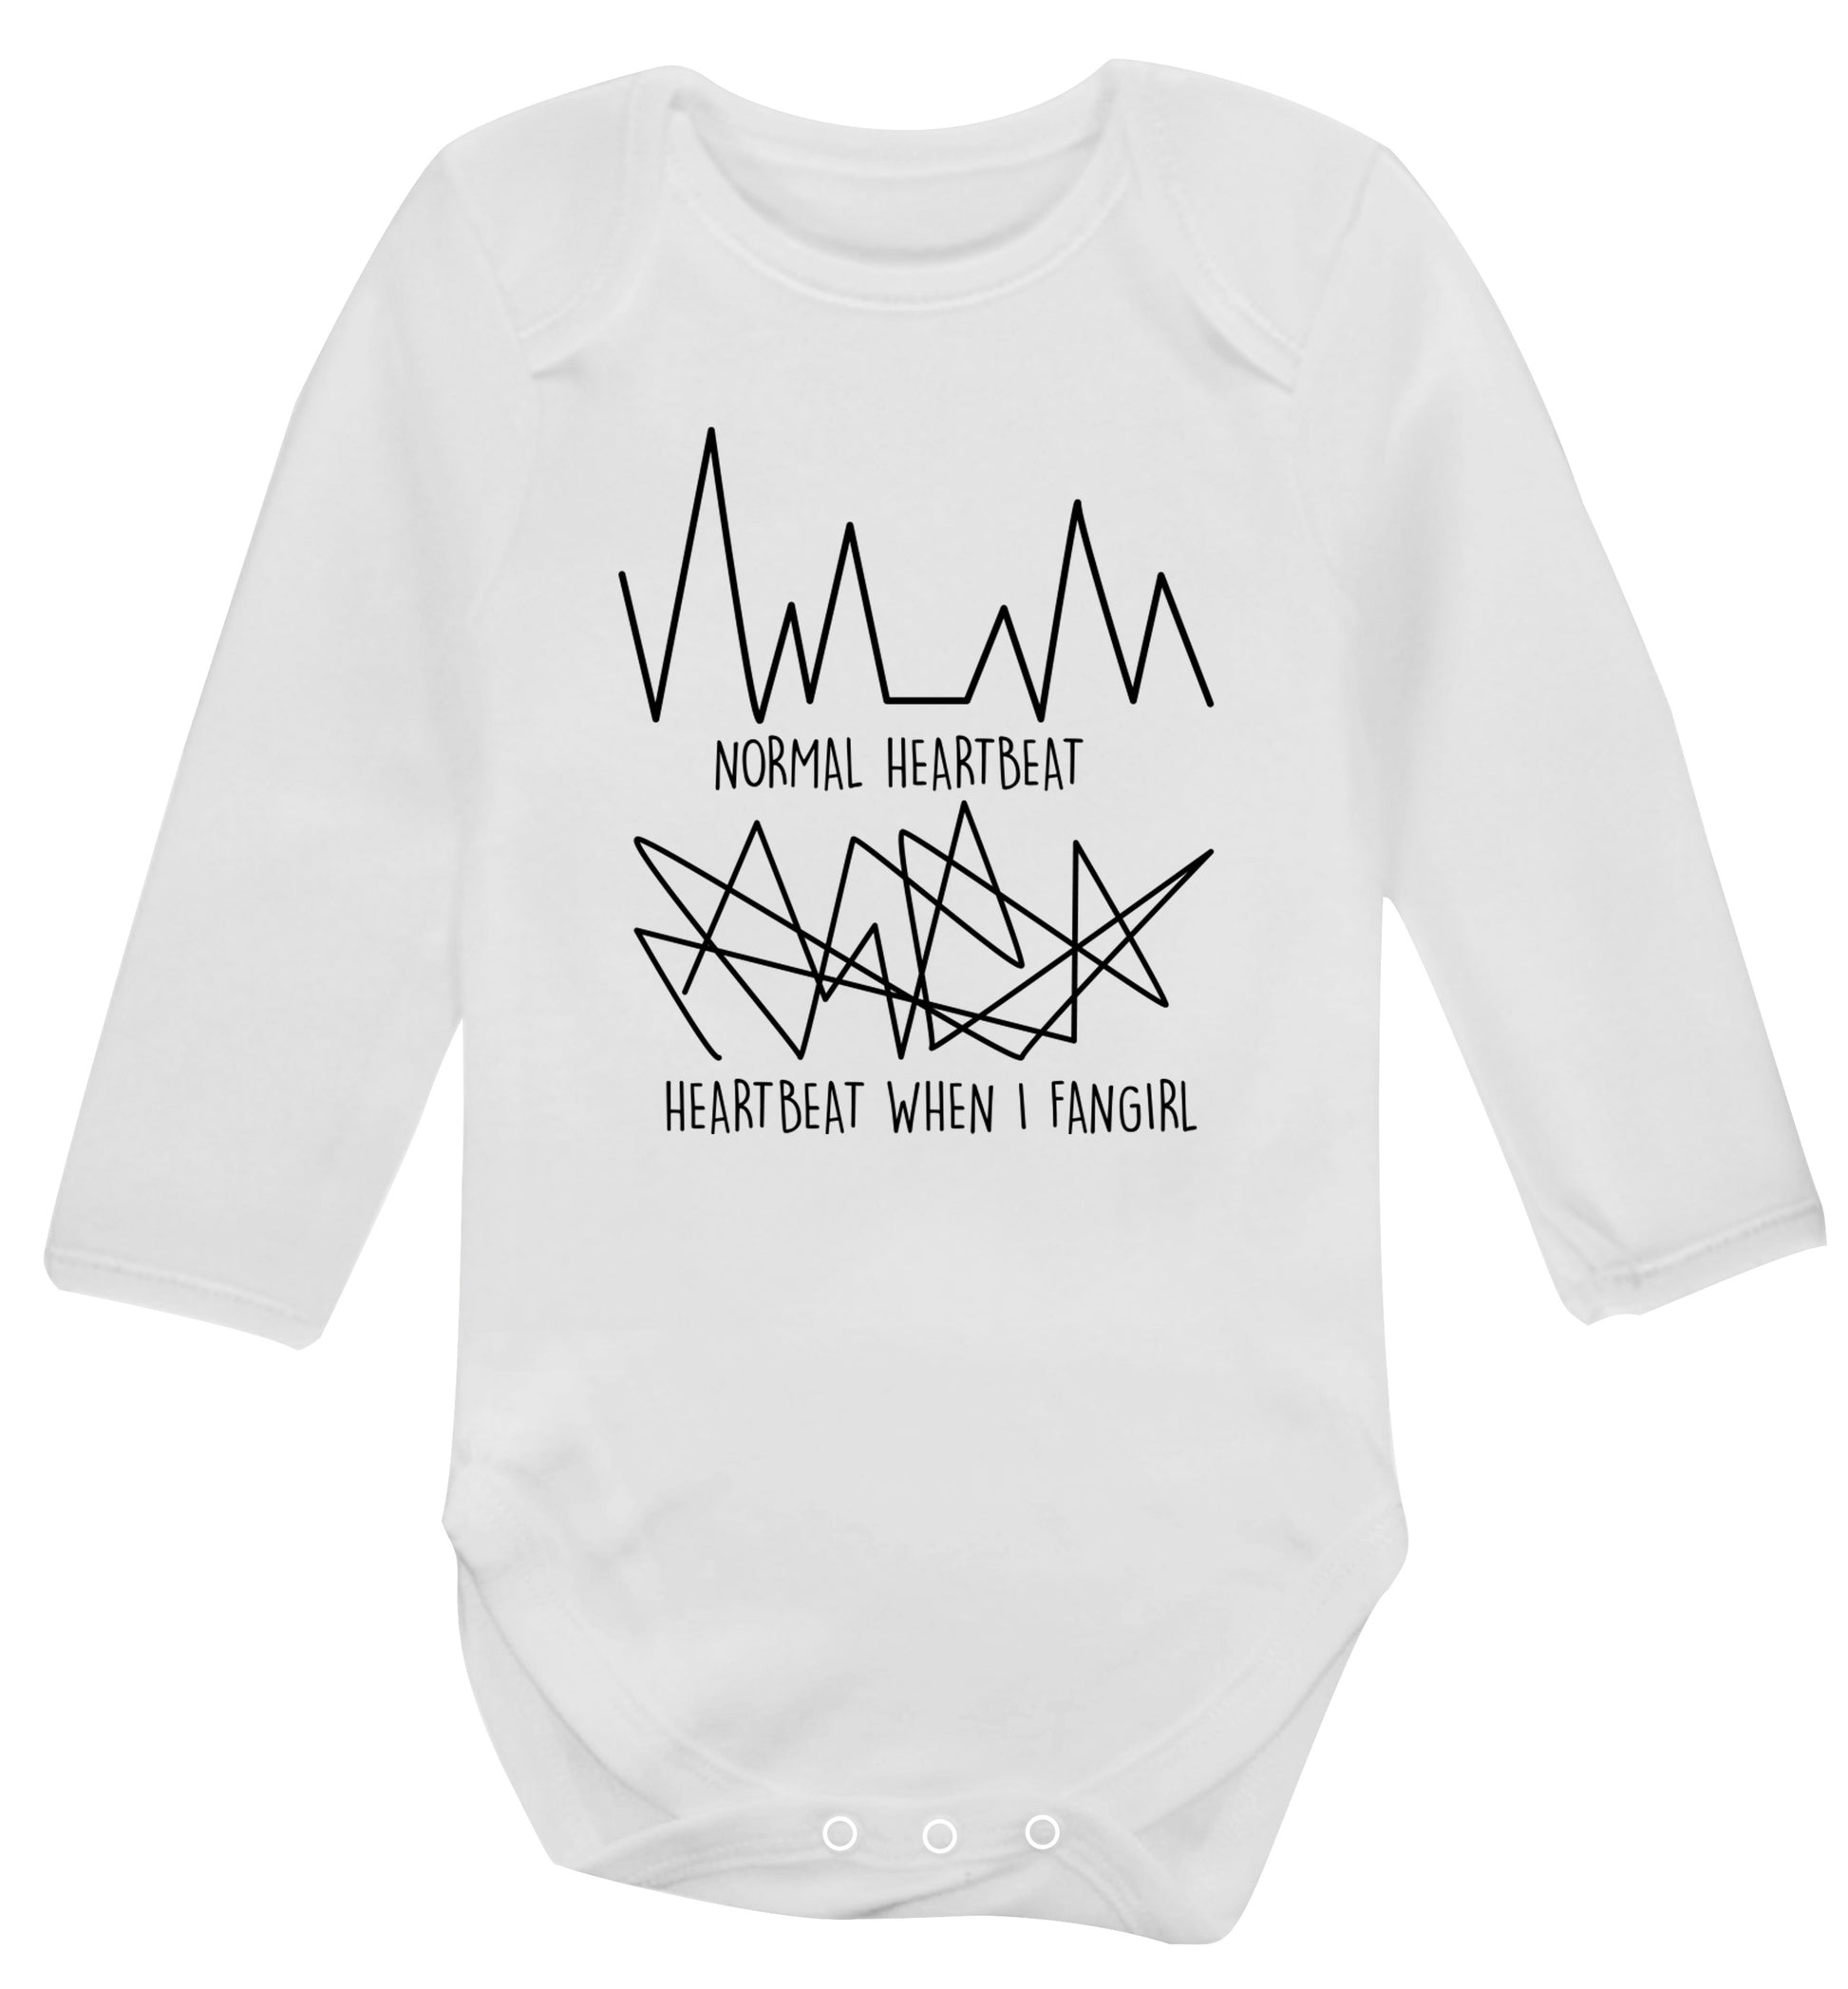 Normal heartbeat heartbeat when I fangirl Baby Vest long sleeved white 6-12 months